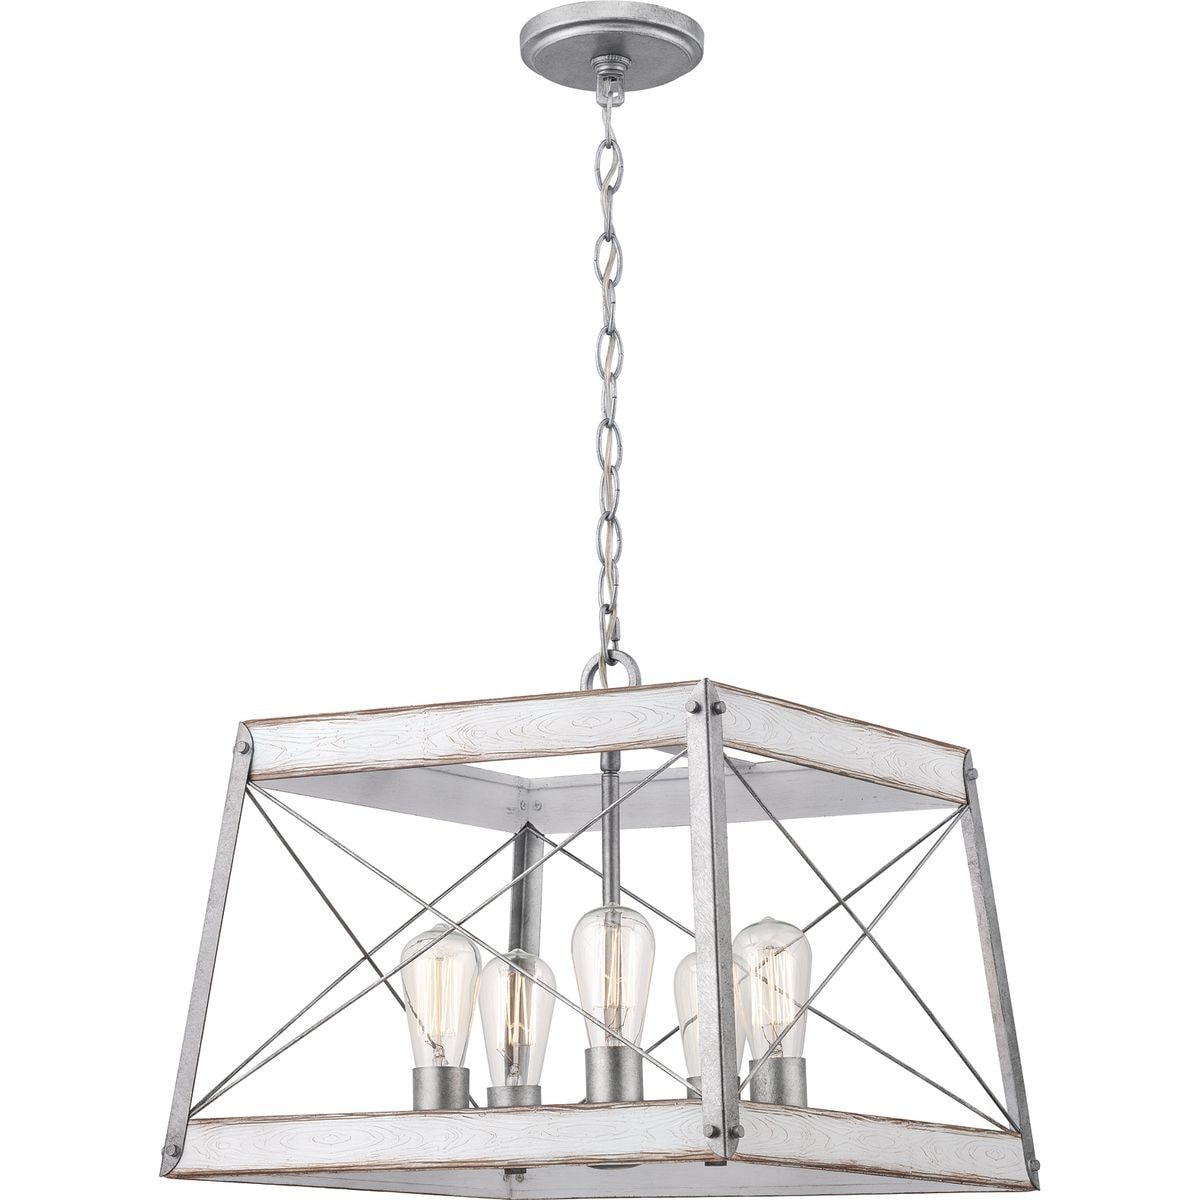 SINGLE CEILING LIGHT With FOLDED BARS AND NO GLASS/3 COLORS/ COUNTRY LIGHTING 